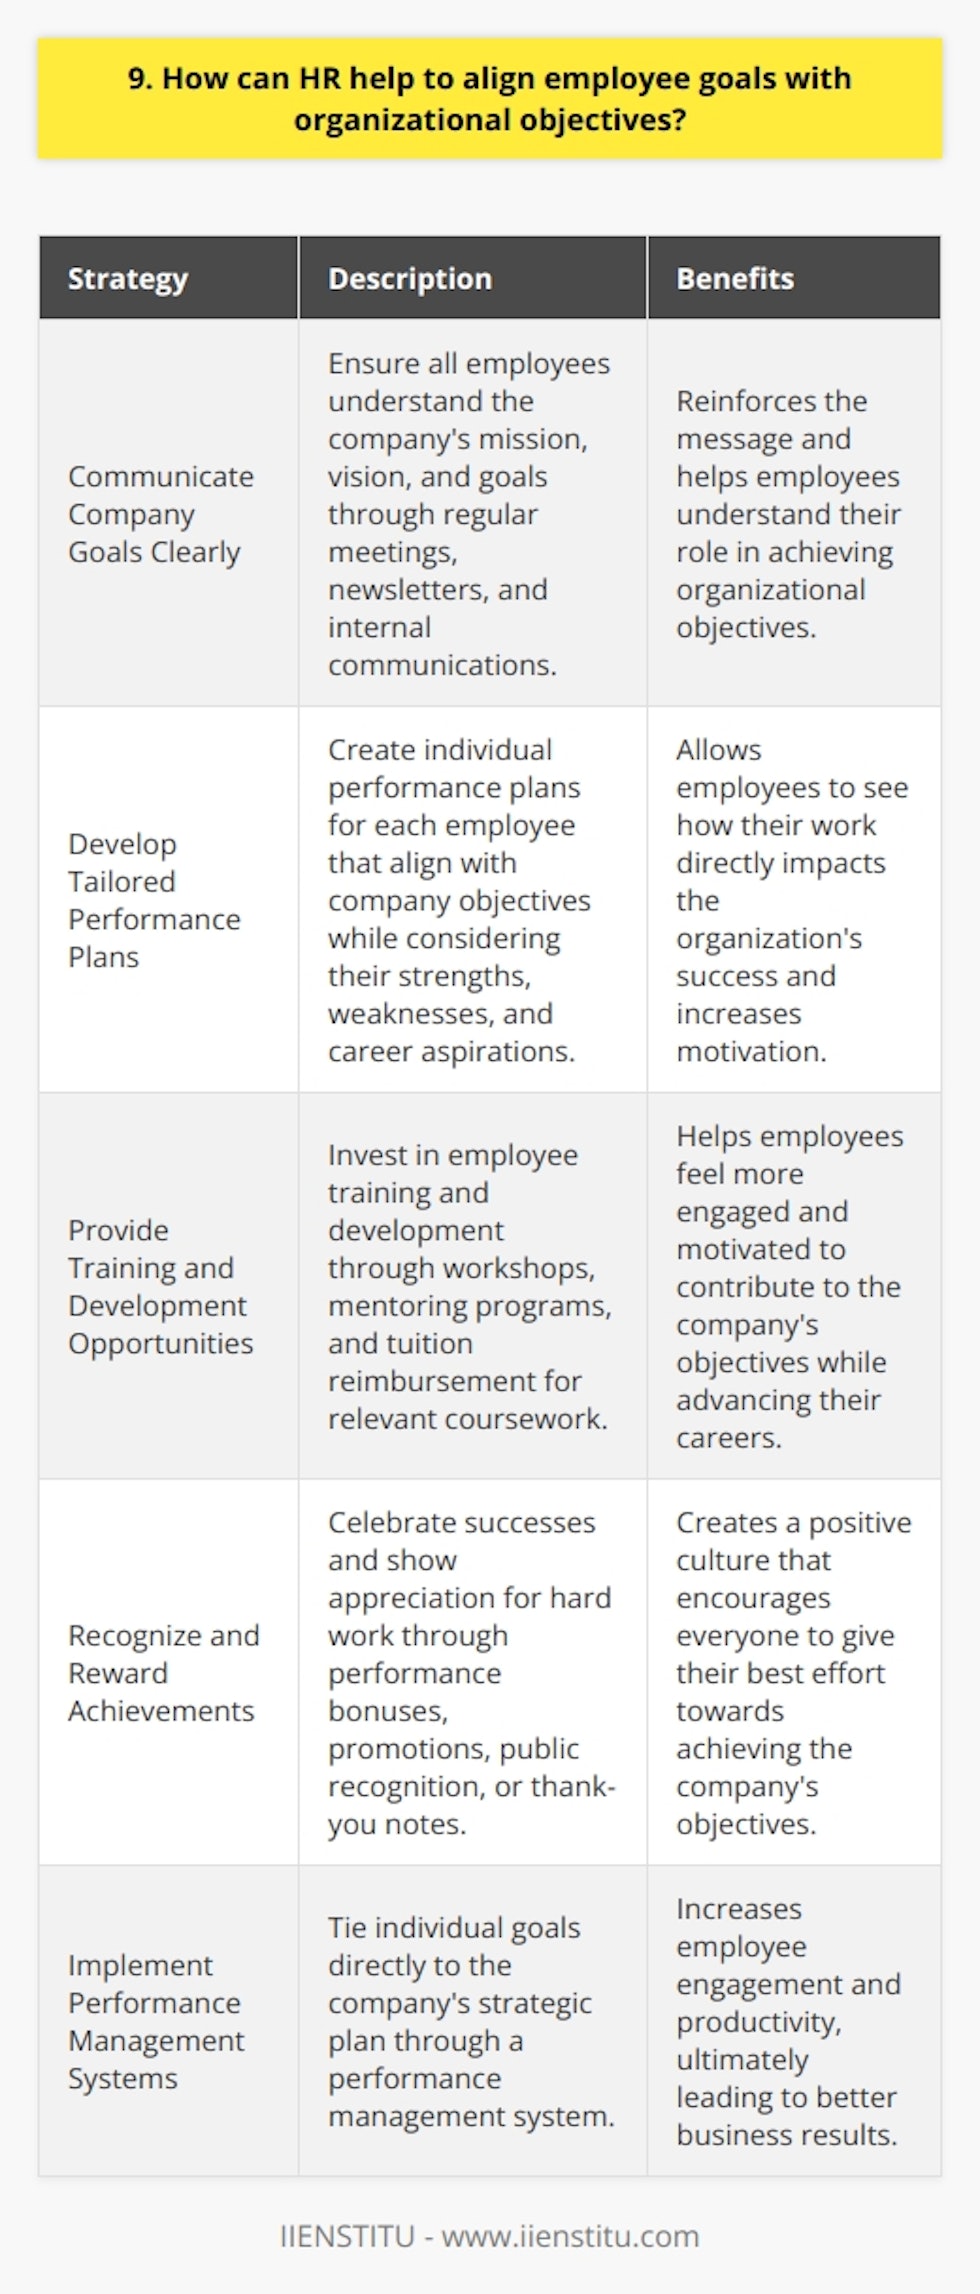 As an HR professional, I believe that aligning employee goals with organizational objectives is crucial for success. Its a challenging task, but there are several strategies that can help. Communicate Company Goals Clearly The first step is to ensure that all employees understand the companys mission, vision, and goals. HR should work with leadership to communicate these objectives clearly and consistently. Regular company-wide meetings, newsletters, and internal communications can help reinforce the message. Develop Tailored Performance Plans Next, HR can work with managers to create individual performance plans for each employee. These plans should align with the overall company objectives while taking into account the employees strengths, weaknesses, and career aspirations. By setting specific, measurable goals that contribute to the bigger picture, employees can see how their work directly impacts the organizations success. Provide Training and Development Opportunities Investing in employee training and development is another way HR can support goal alignment. By providing opportunities for employees to learn new skills and advance their careers, HR can help them feel more engaged and motivated to contribute to the companys objectives. This can include workshops, mentoring programs, and tuition reimbursement for relevant coursework. Recognize and Reward Achievements Finally, HR can play a key role in recognizing and rewarding employees who consistently meet or exceed their goals. This can include performance bonuses, promotions, or even simple gestures like public recognition or a thank-you note. By celebrating successes and showing appreciation for hard work, HR can help create a positive culture that encourages everyone to give their best effort towards achieving the companys objectives. In my experience, Ive seen firsthand how effective these strategies can be. At my previous company, we implemented a new performance management system that tied individual goals directly to the companys strategic plan. We also launched a leadership development program that provided high-potential employees with the skills and knowledge they needed to take on bigger roles. As a result, we saw a significant increase in employee engagement and productivity, which ultimately led to better business results. Aligning employee goals with organizational objectives is an ongoing process that requires communication, collaboration, and a commitment to continuous improvement. By taking a proactive approach and leveraging these strategies, HR can help create a culture of success that benefits everyone involved.